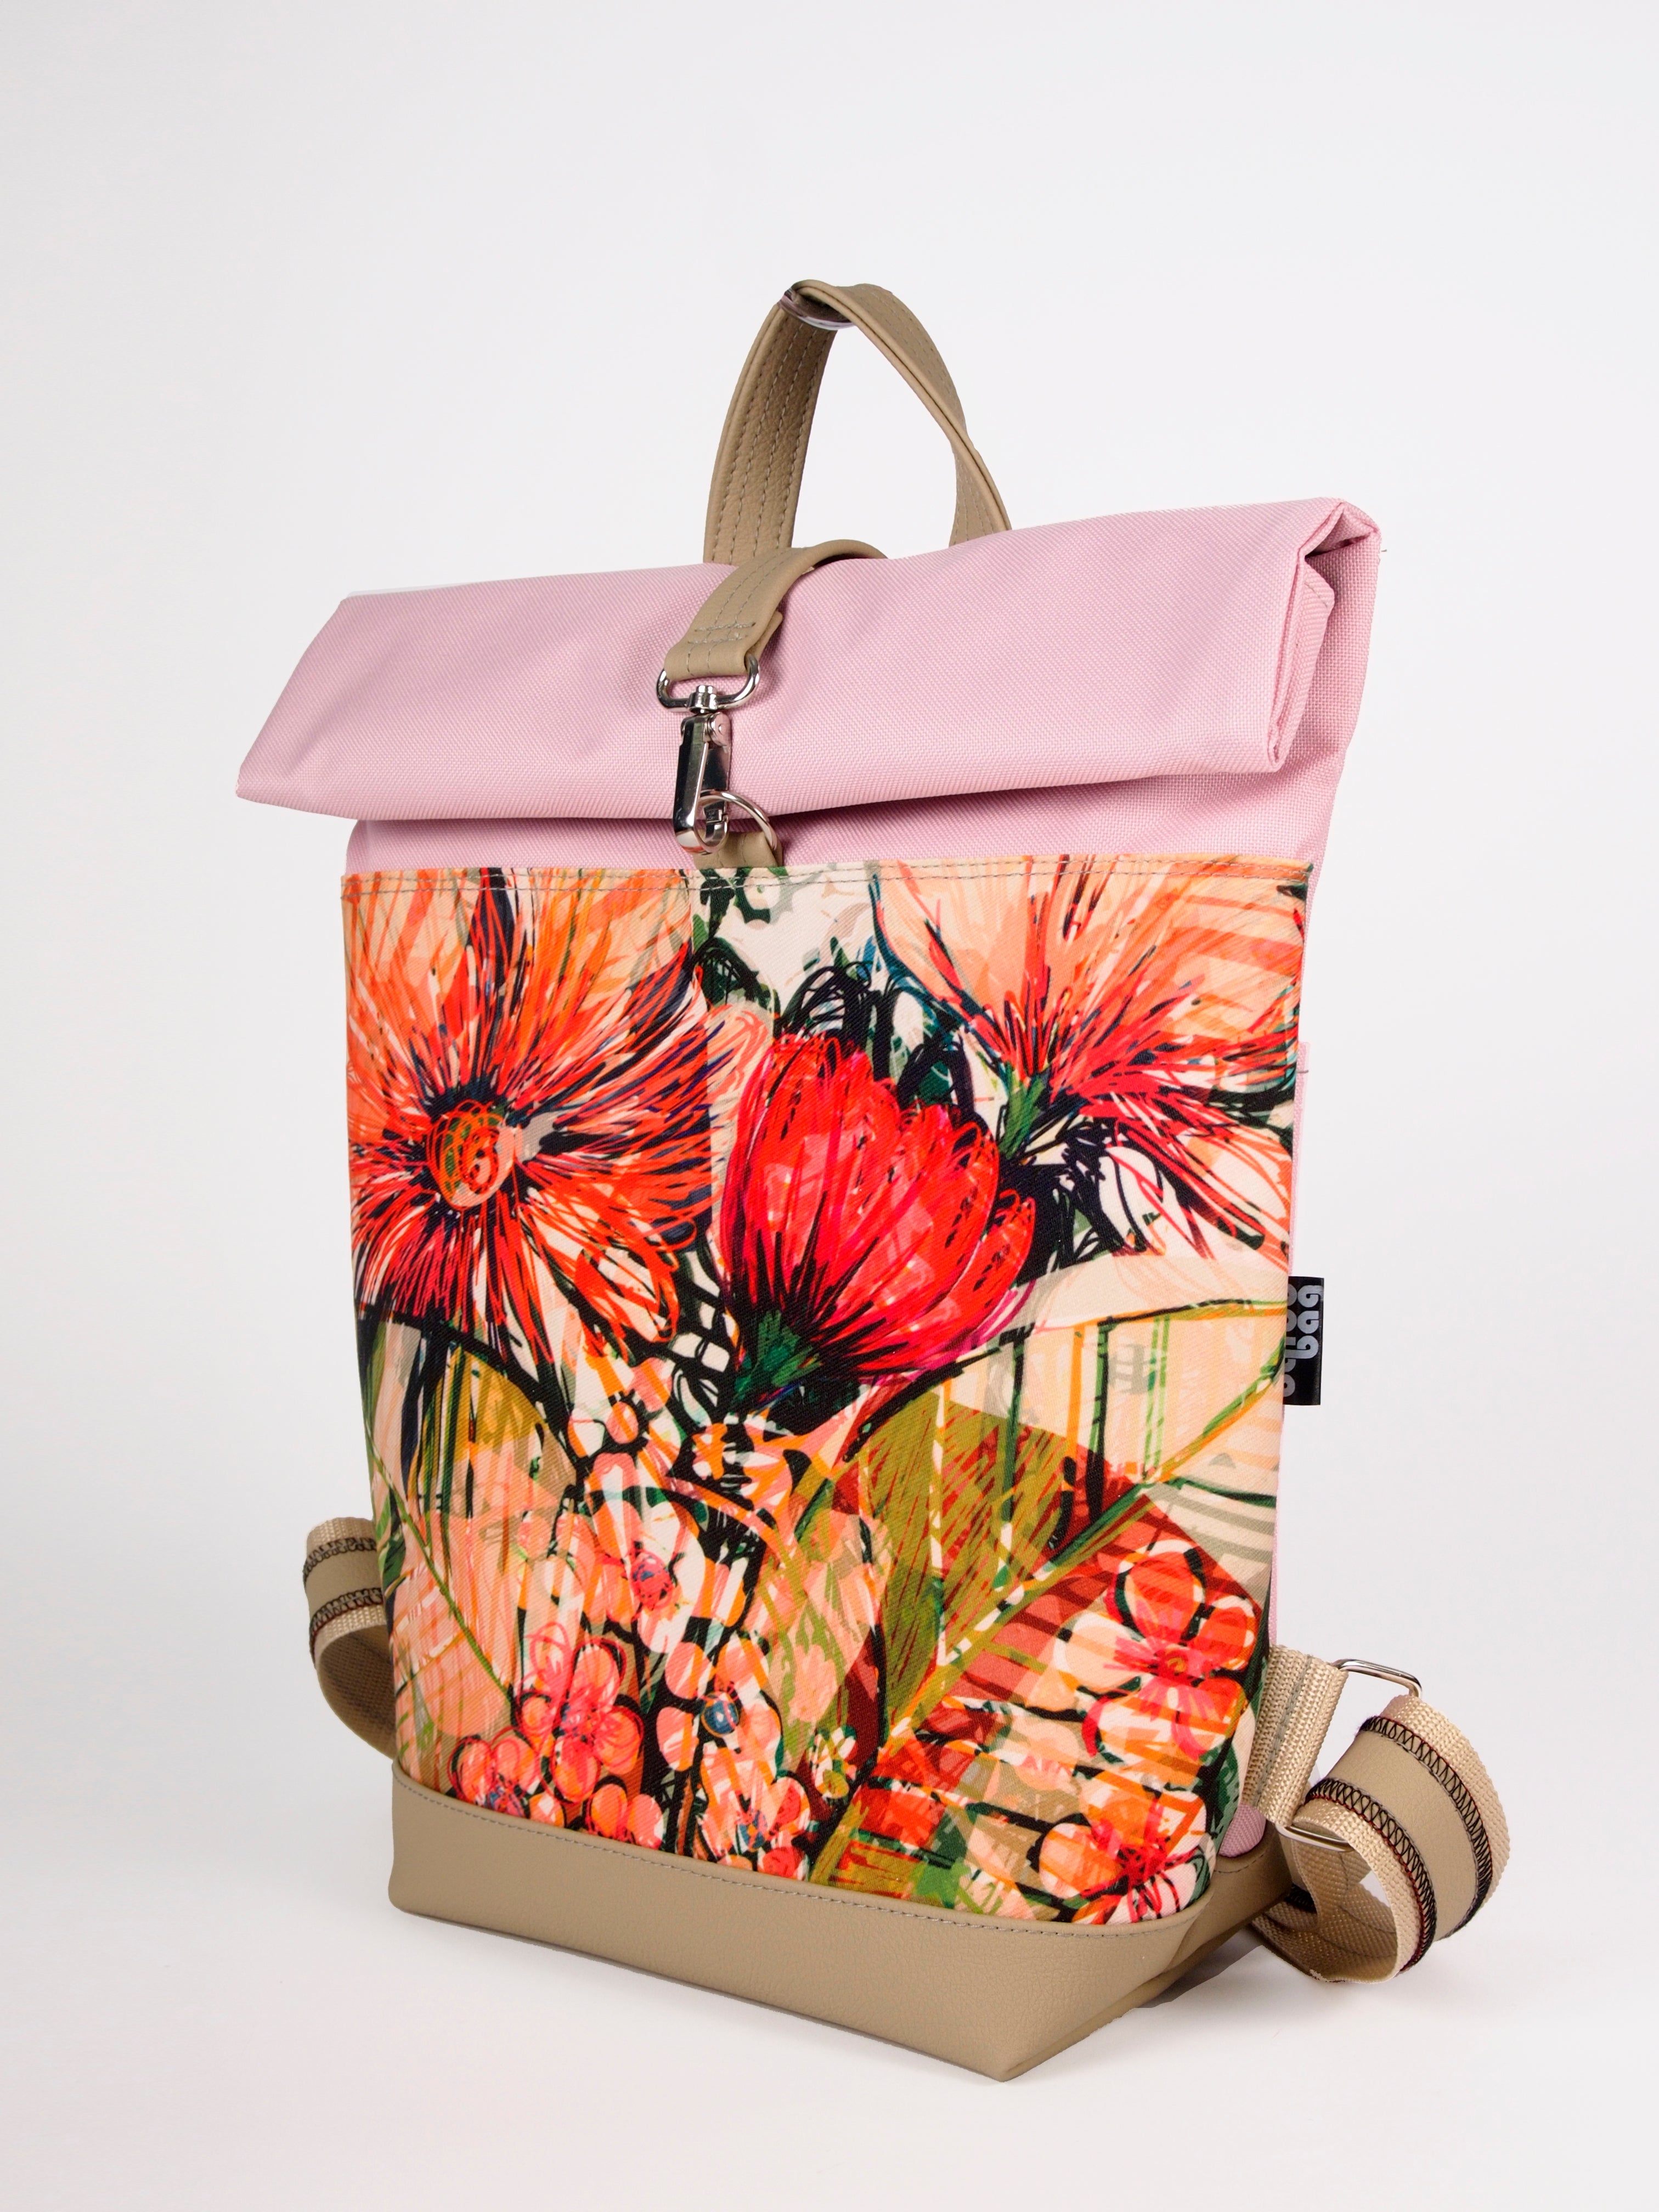 Bardo roll backpack - Fragrant garden - Premium Bardo backpack from BARDO ART WORKS - Just lvabstract, art, backpack, flowers, gift, green, handemade, orange, ping, purple, red, tablet, urban style, vegan leather, woman, yellow85.00! Shop now at BARDO ART WORKS